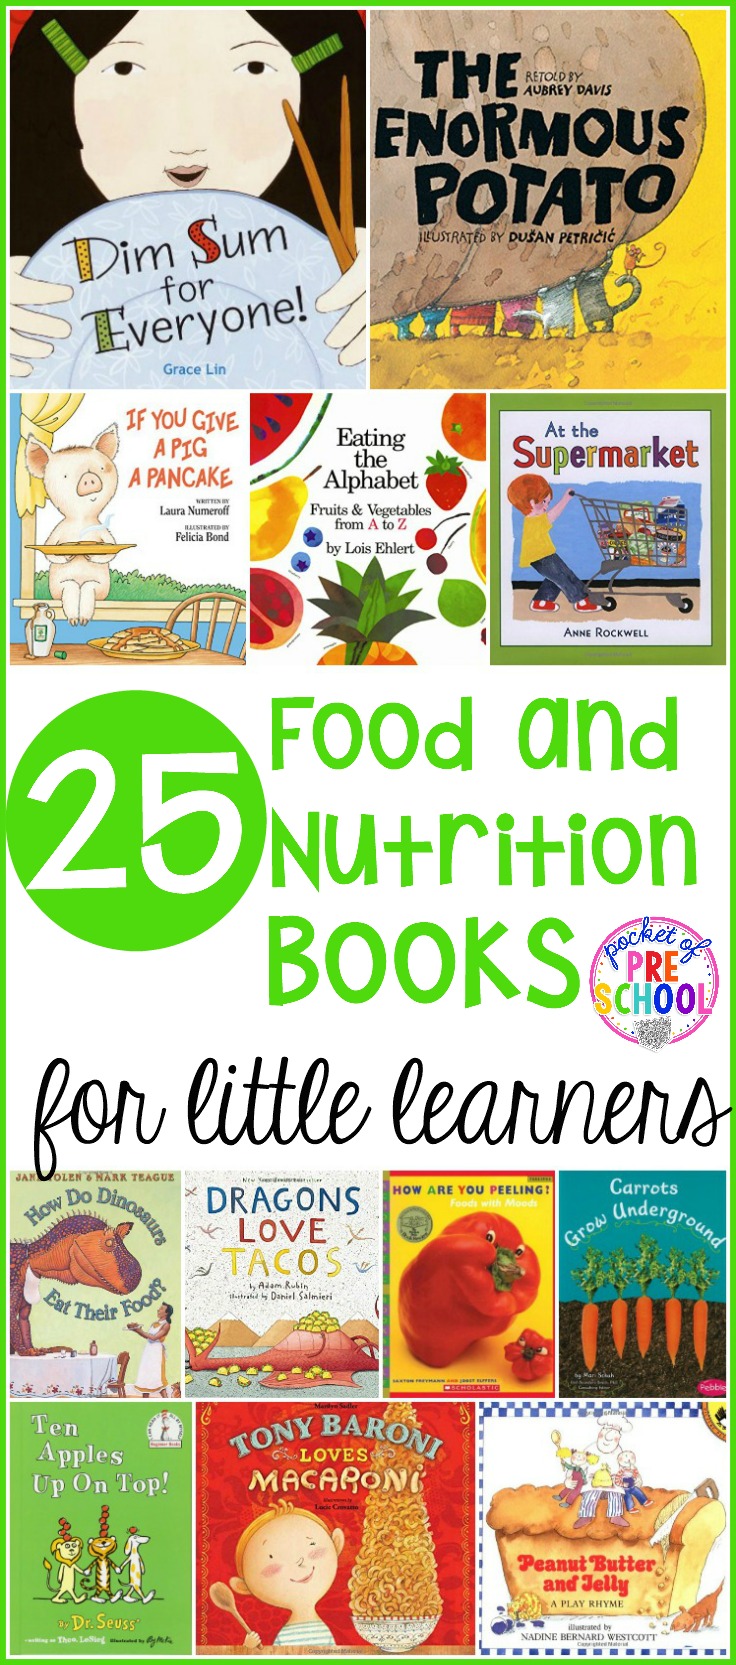 Food and Nutrition Books for Little Learners Pocket of Preschool